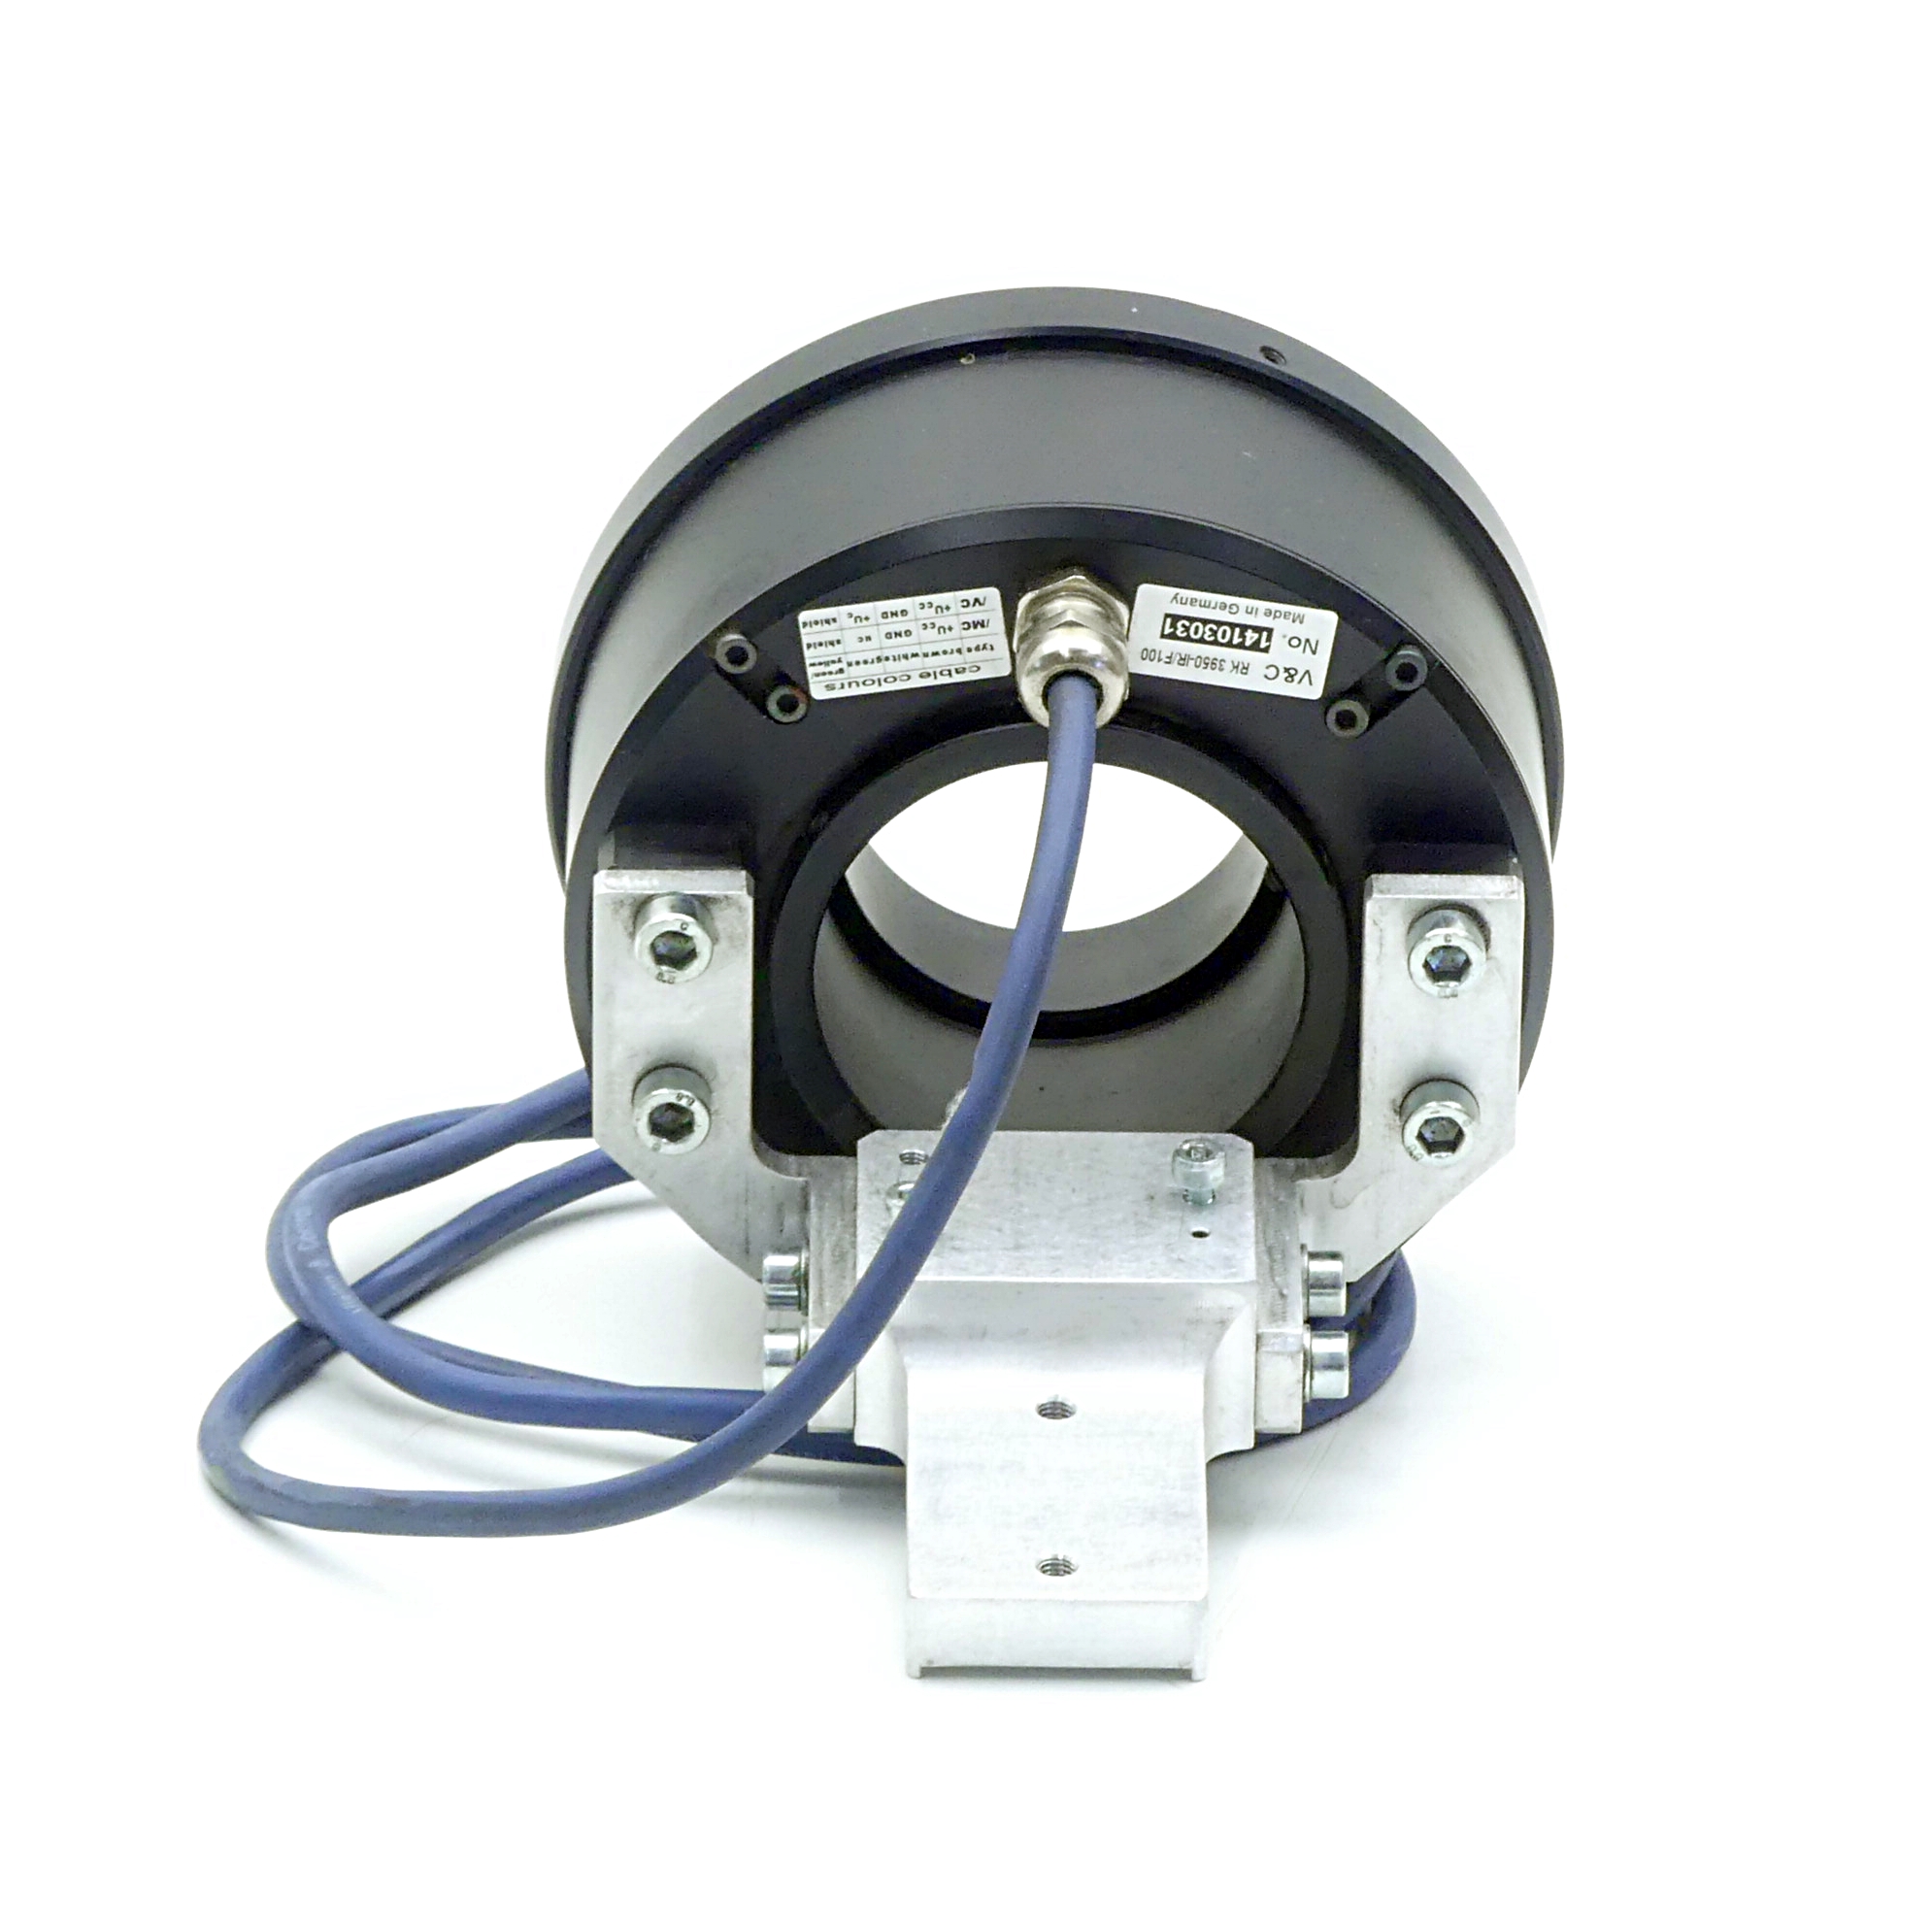 Ring lighting with holder for camera CCD XC-ES50 